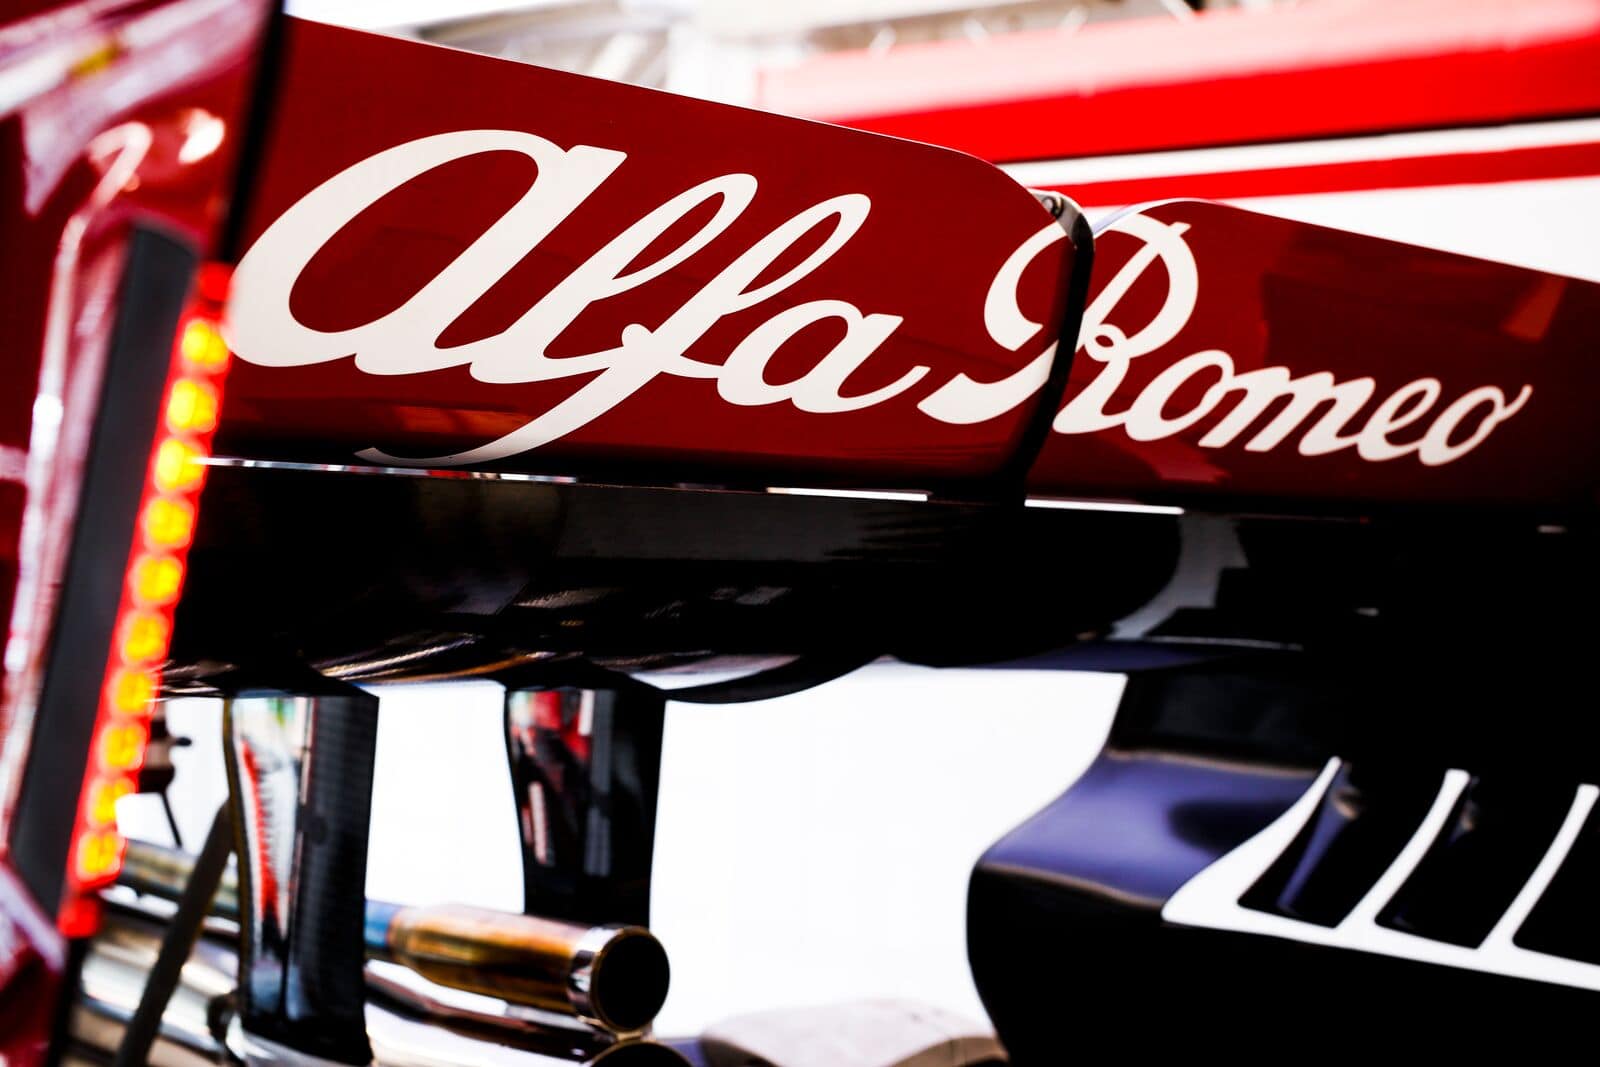 How has the use of DRS affected Formula 1 racing?